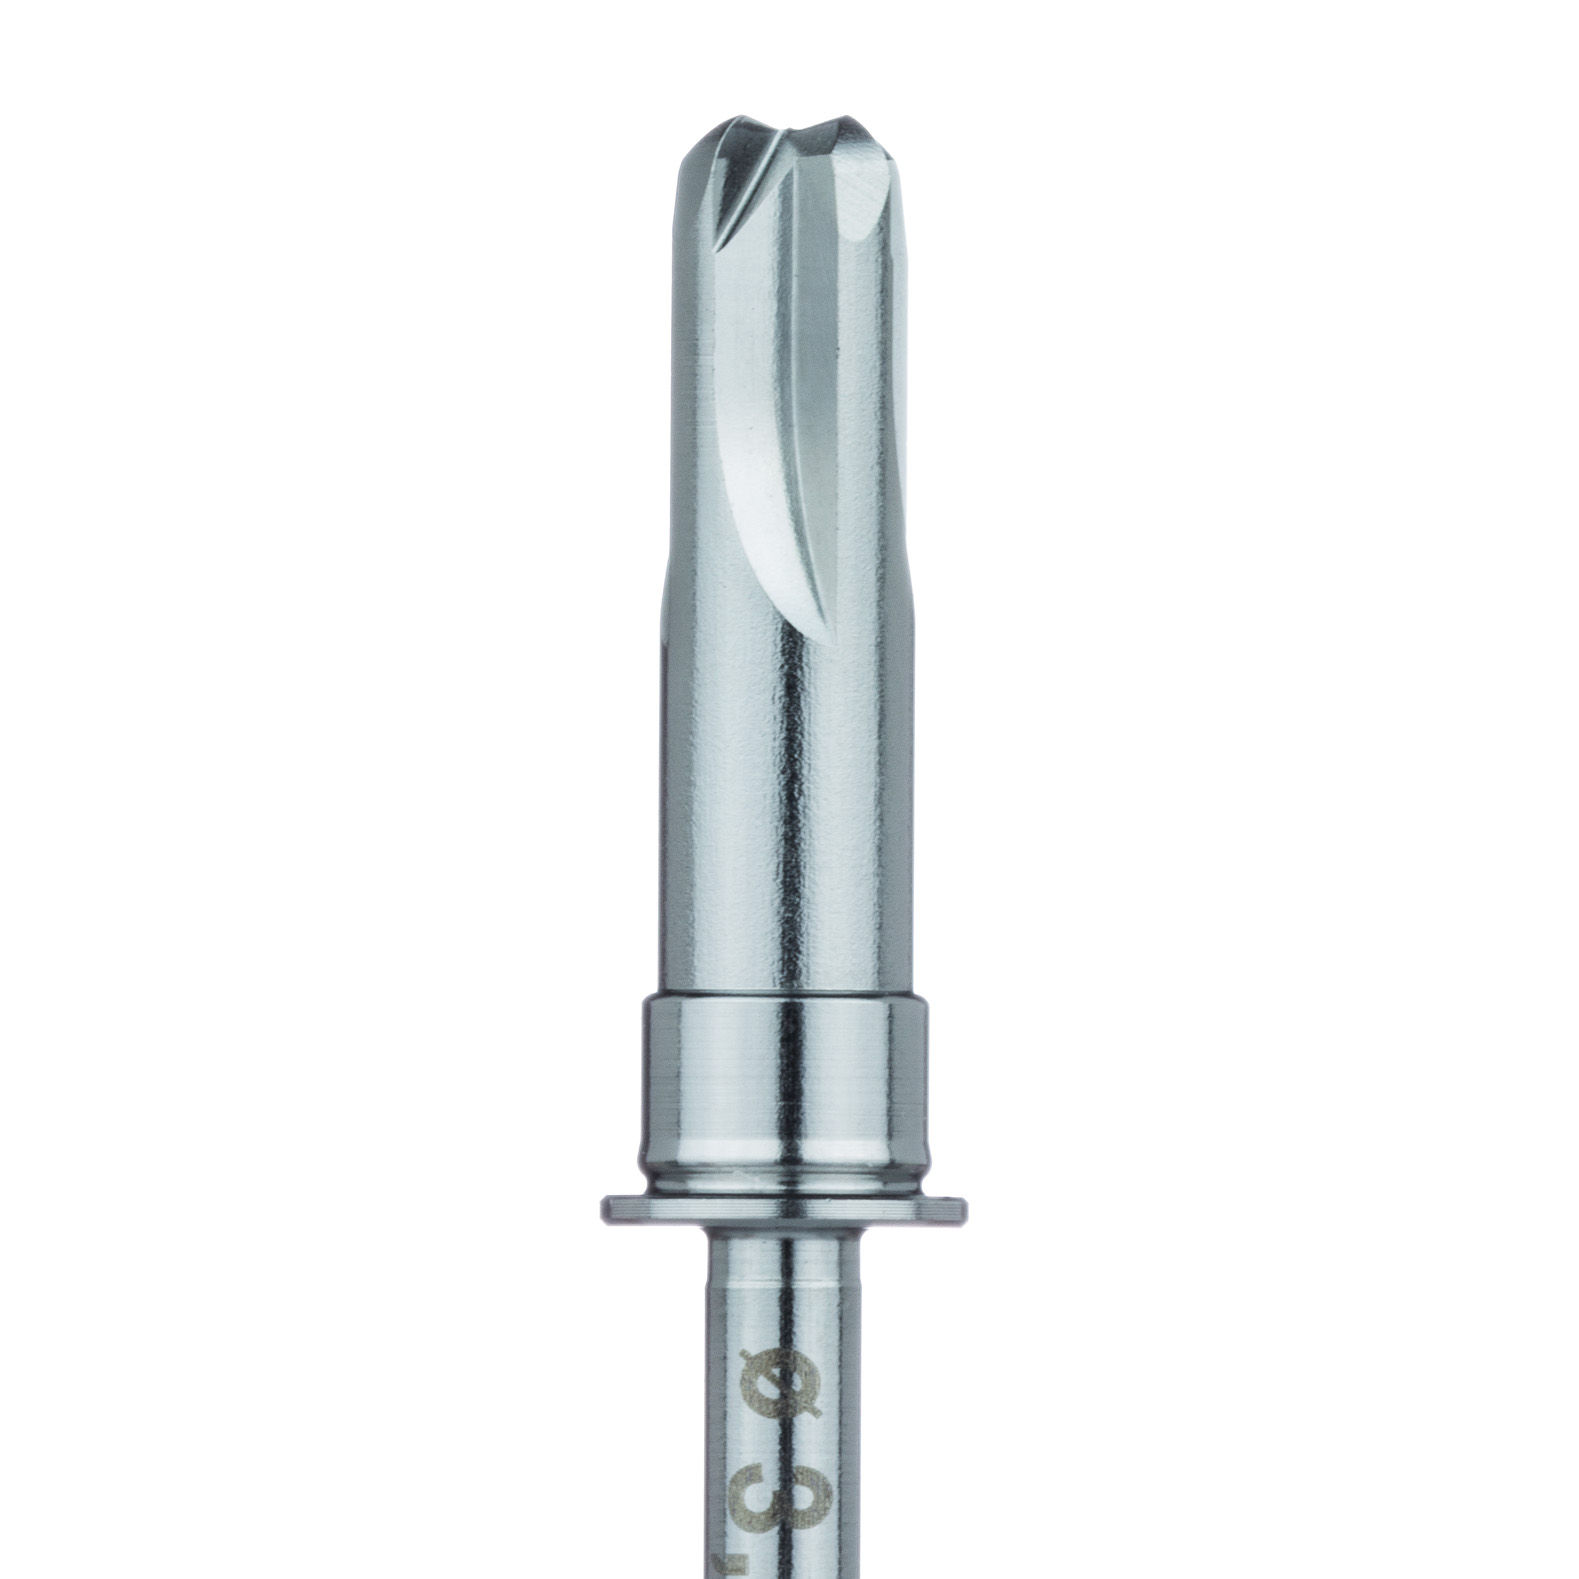 CL006 Surgery, Crestal Drill with stop, 3.8mm RAXL